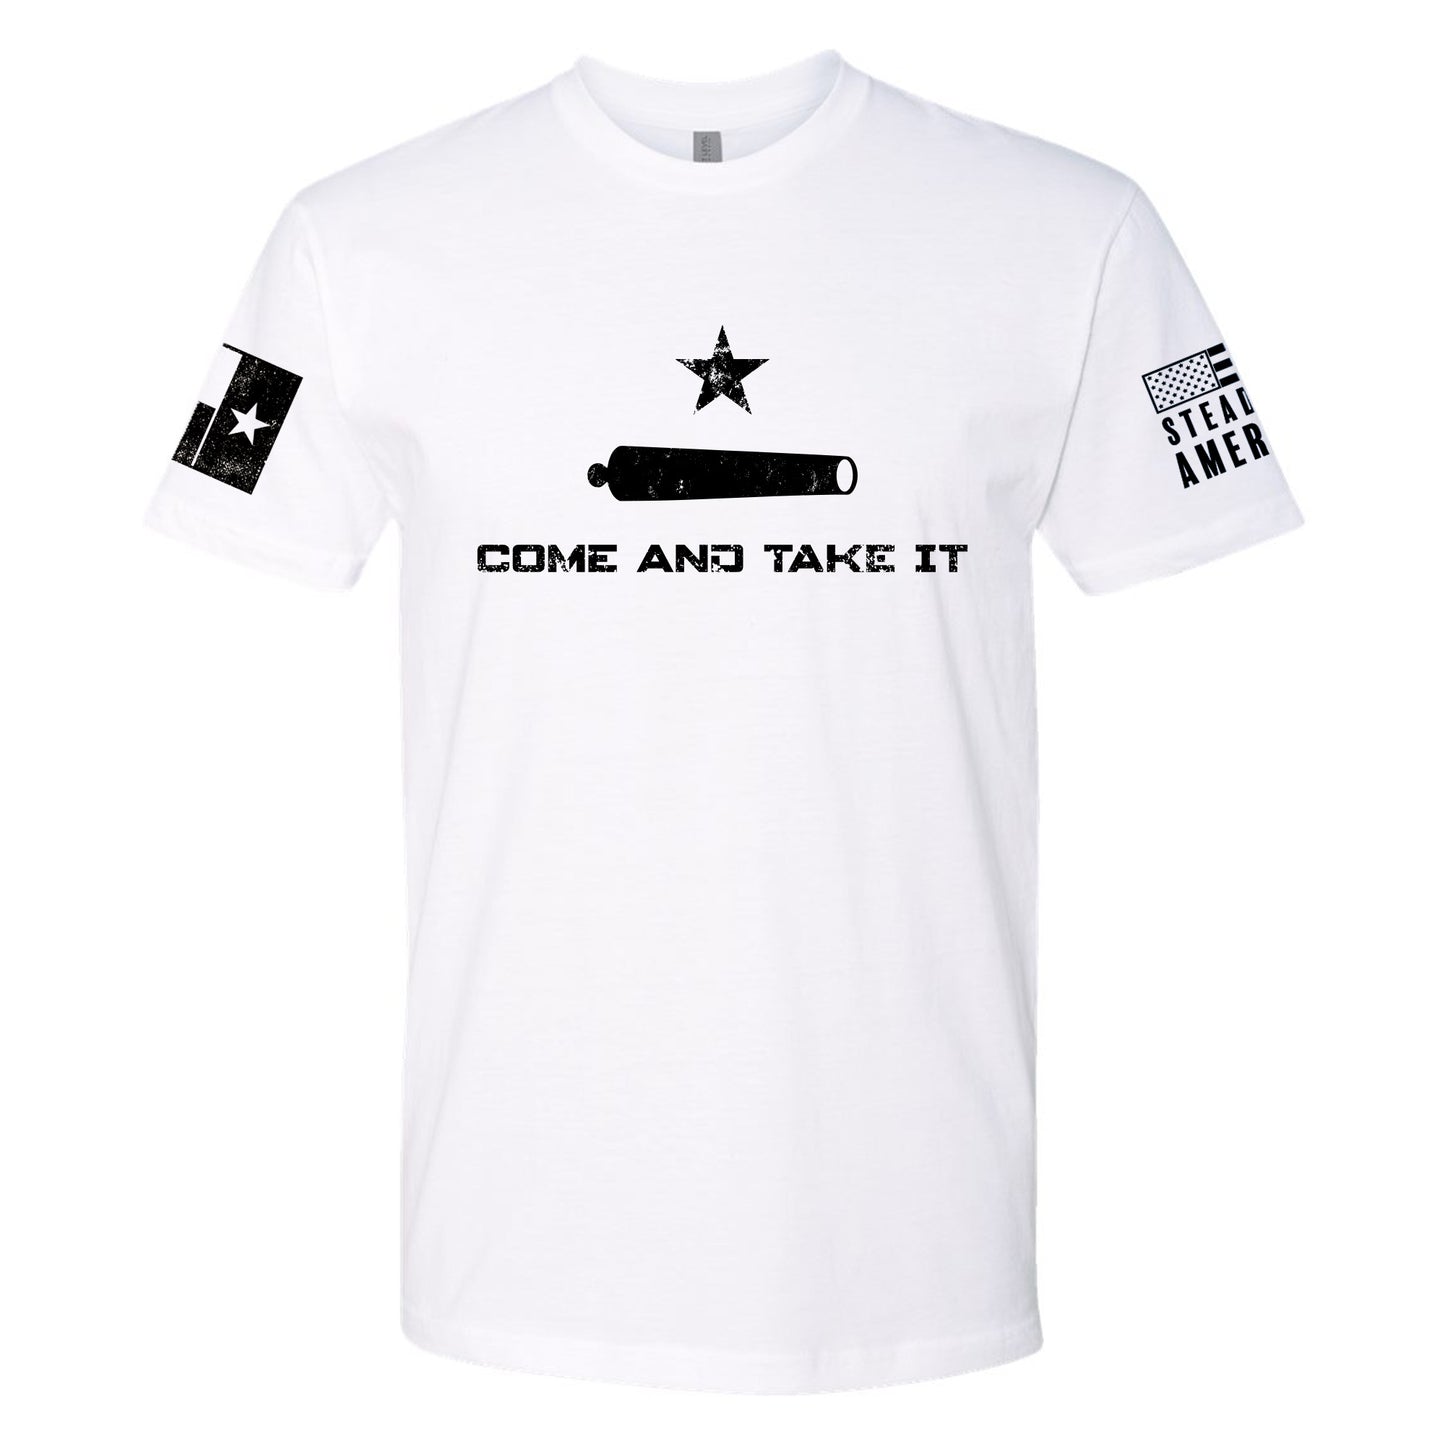 Steadfast American - Come and Take It, Cannon T-Shirt